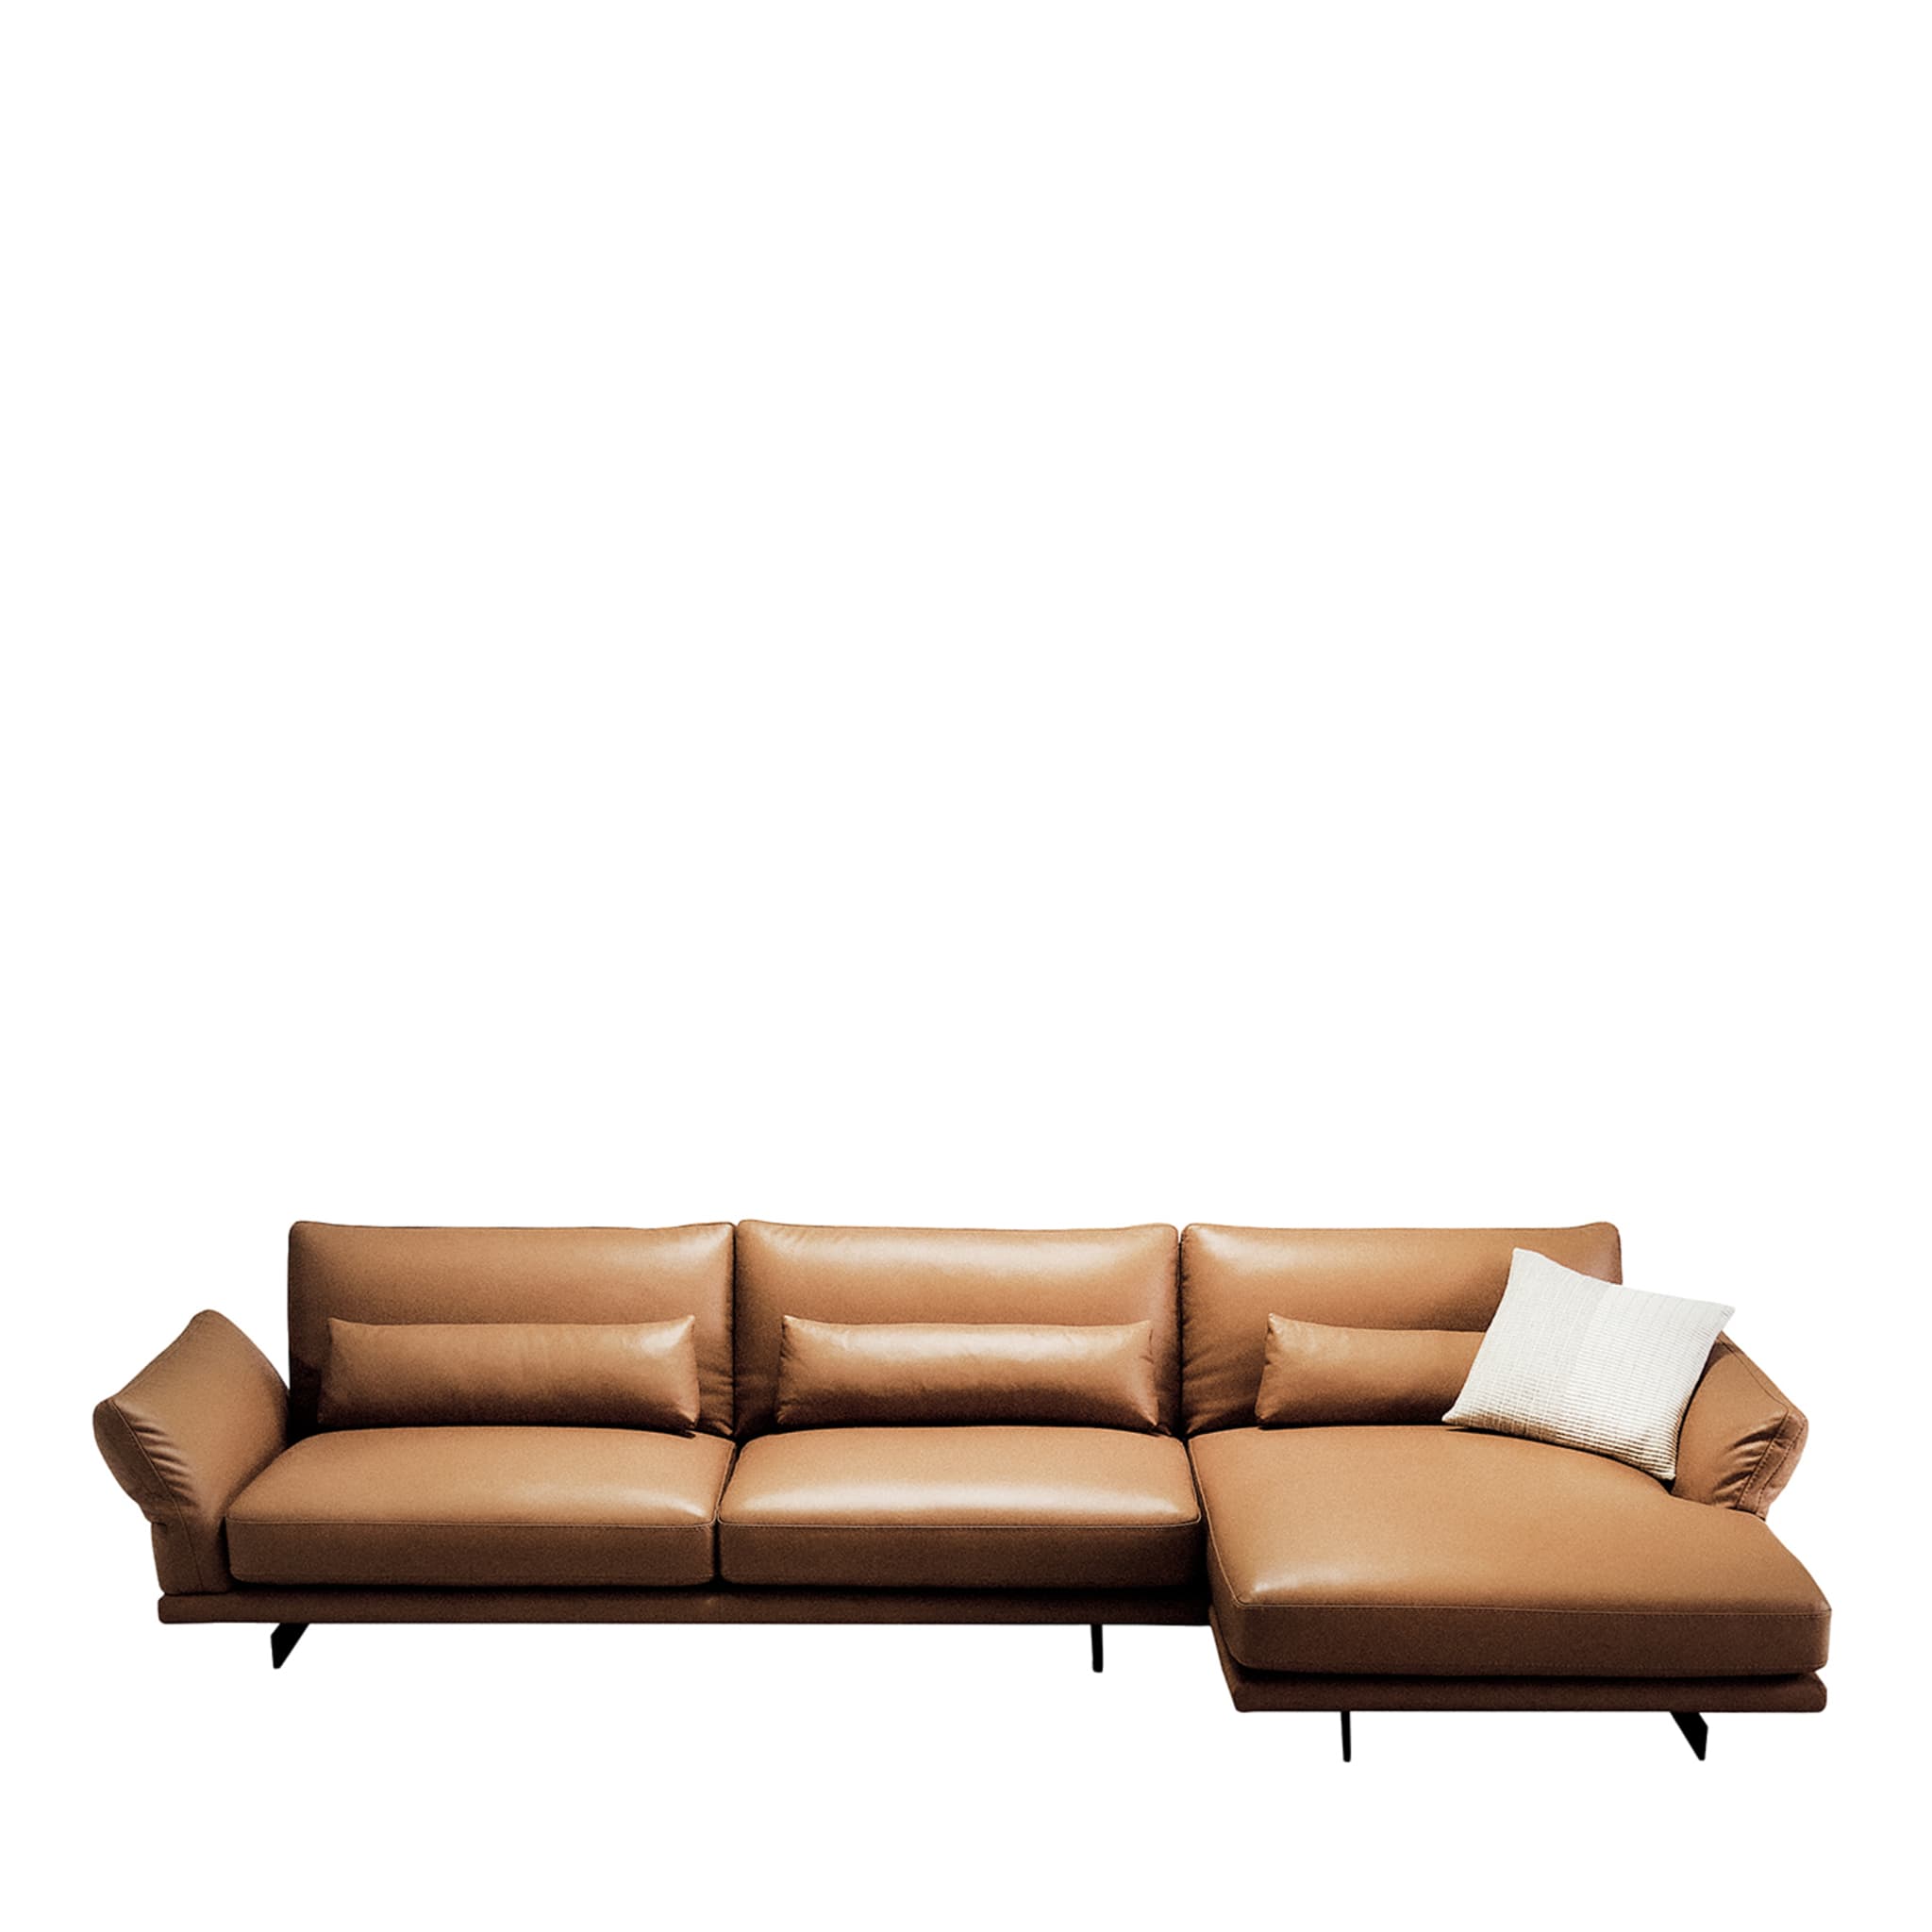 Beverly 3-Module Leather Sofa by Ludovica + Roberto Palomba - Main view